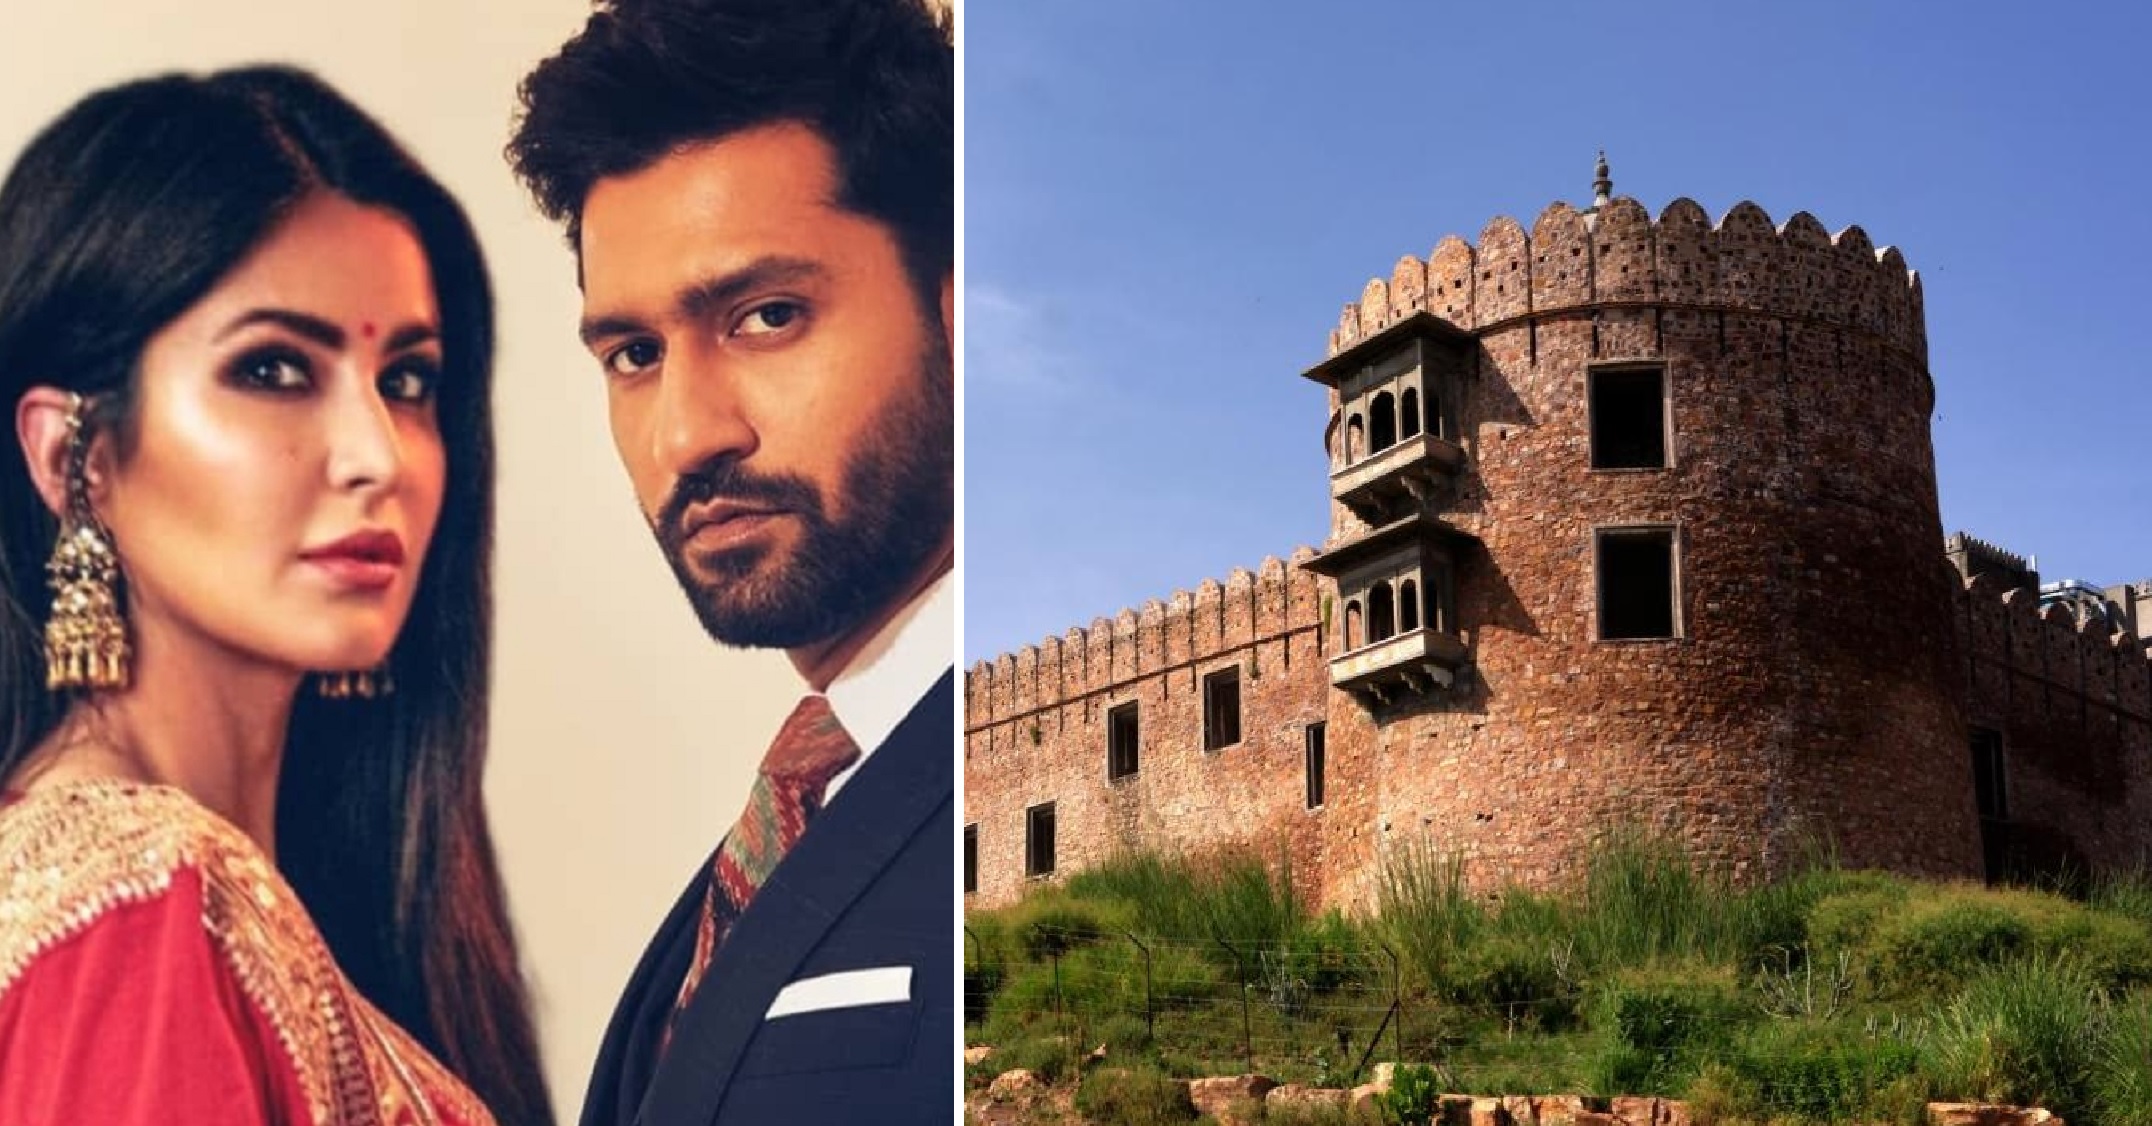 Over 45 Hotels Booked For Vicky Kaushal & Katrina Kaif Wedding, Celebrations Will Run For 3 Days!